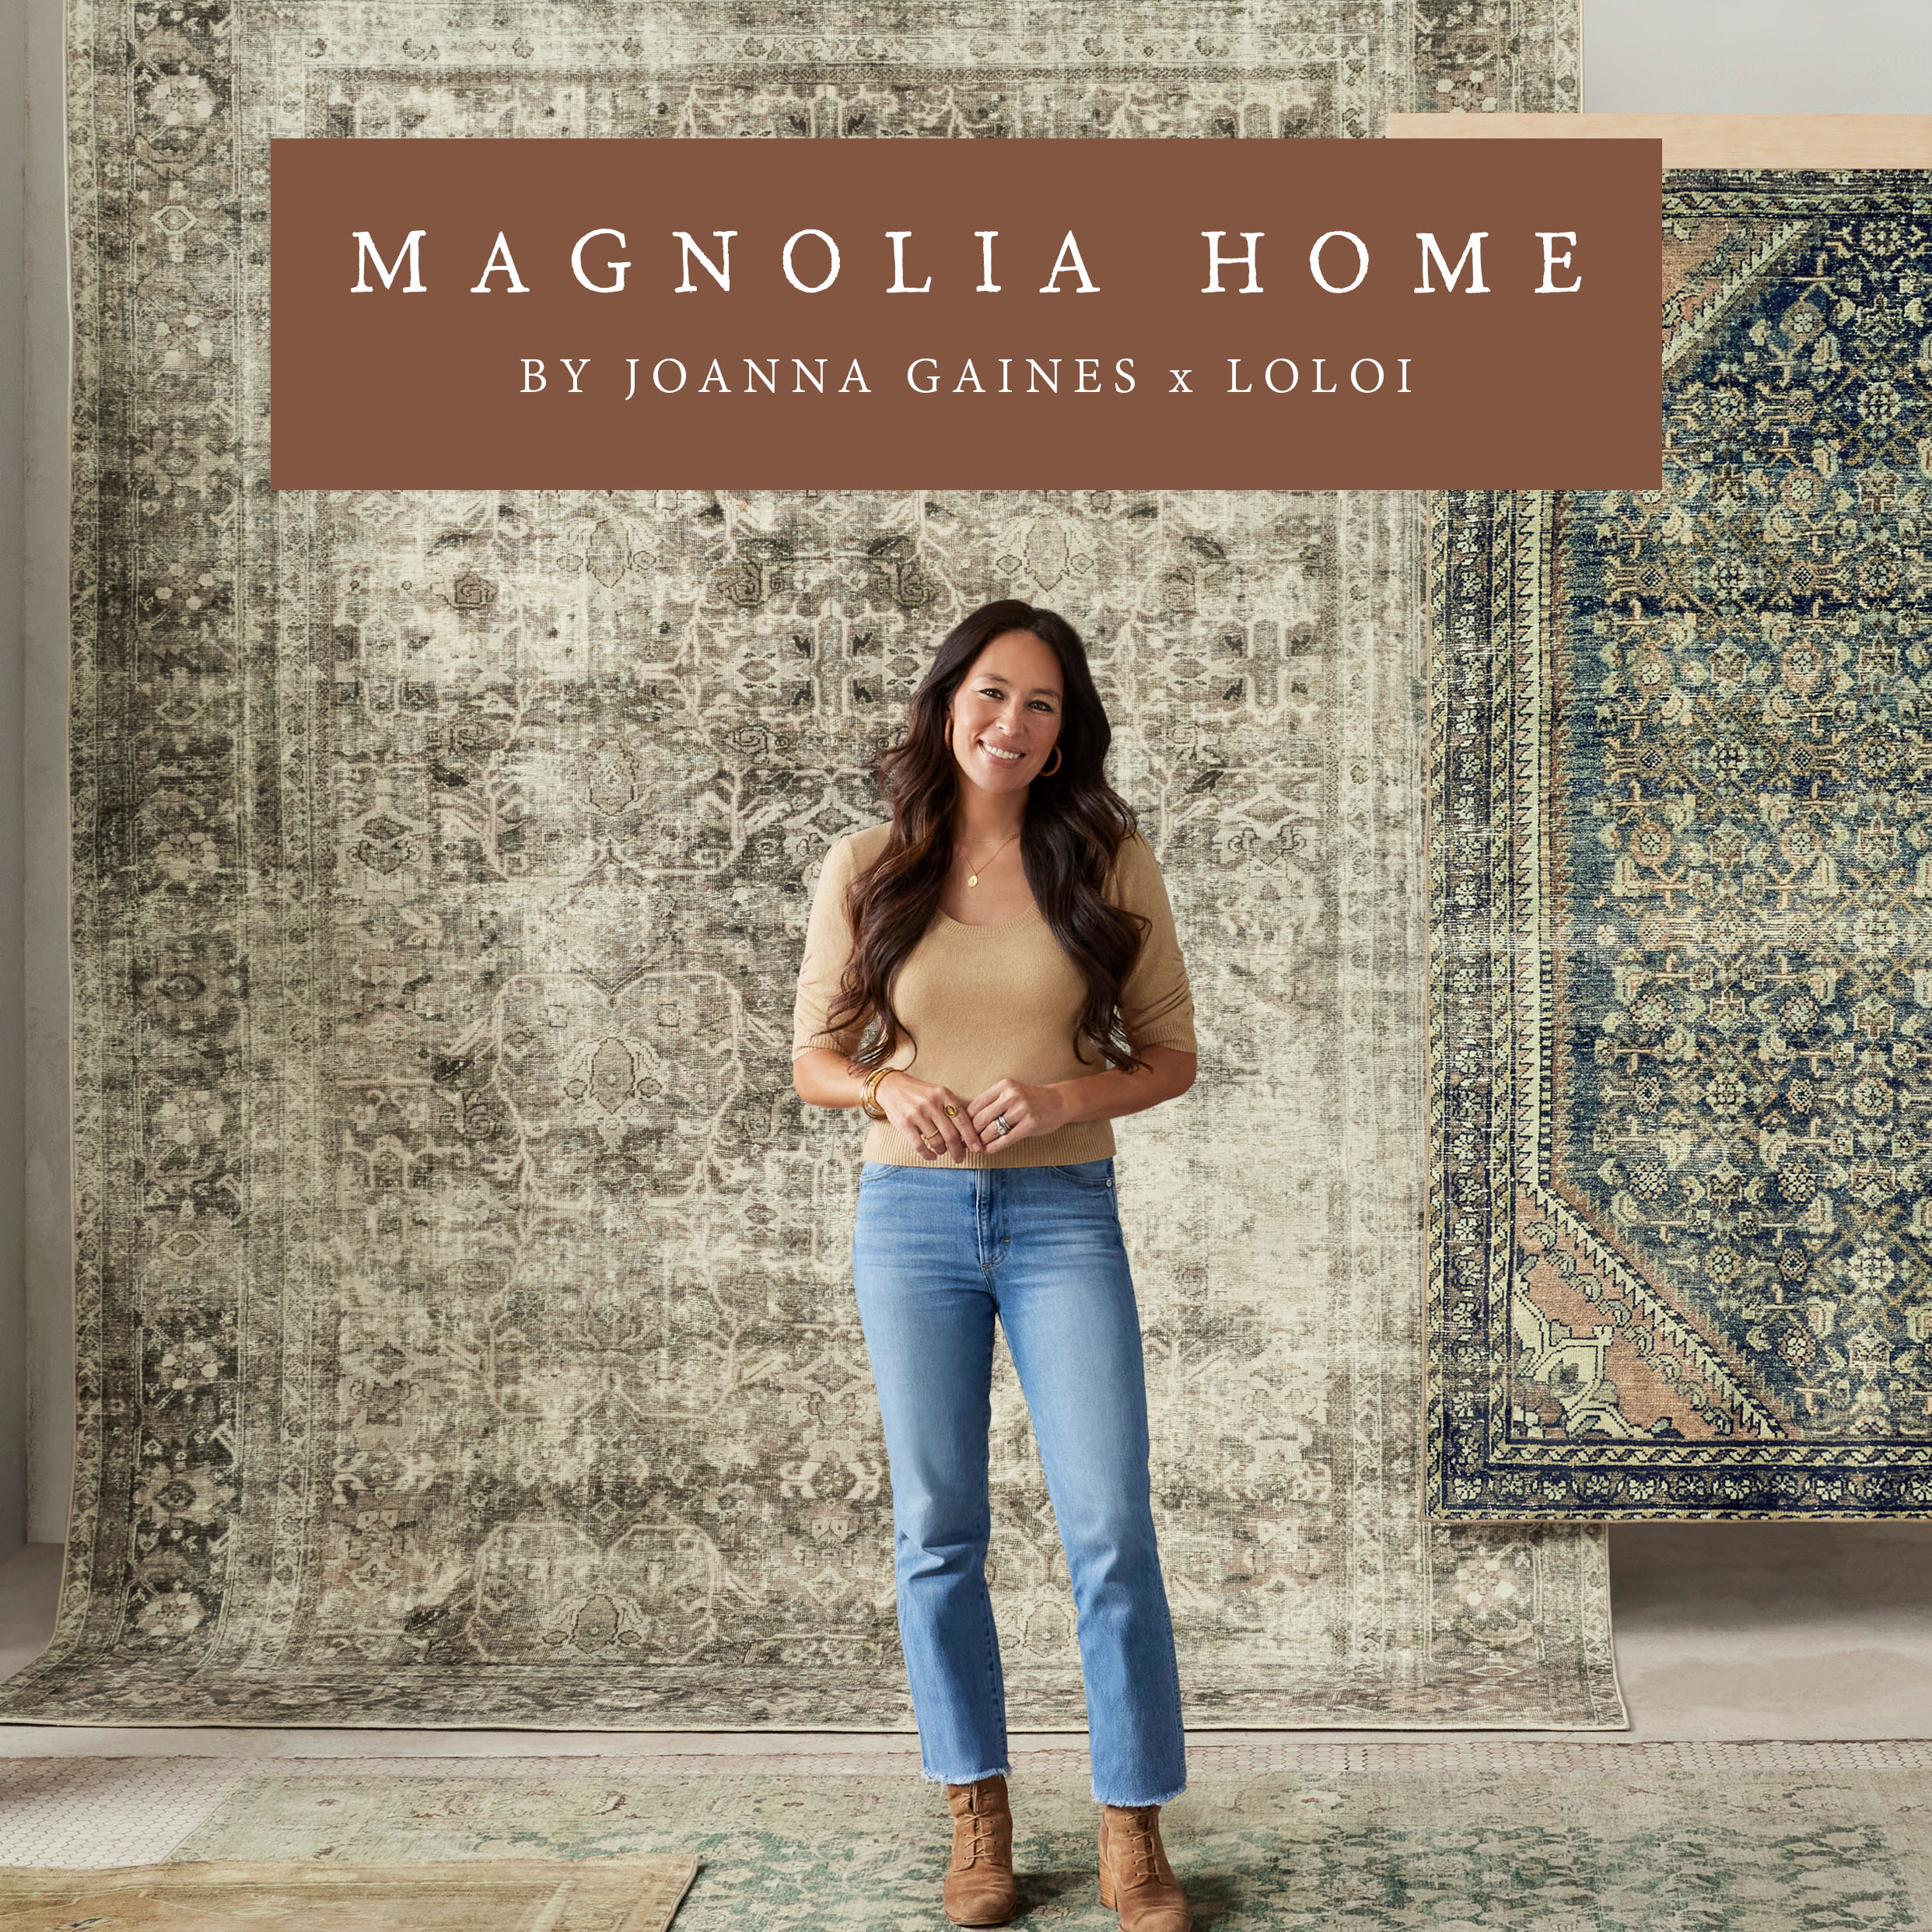 Magnolia Home joanna gaines x loloi. Joanna gaines stands in front of rugs on a wall 